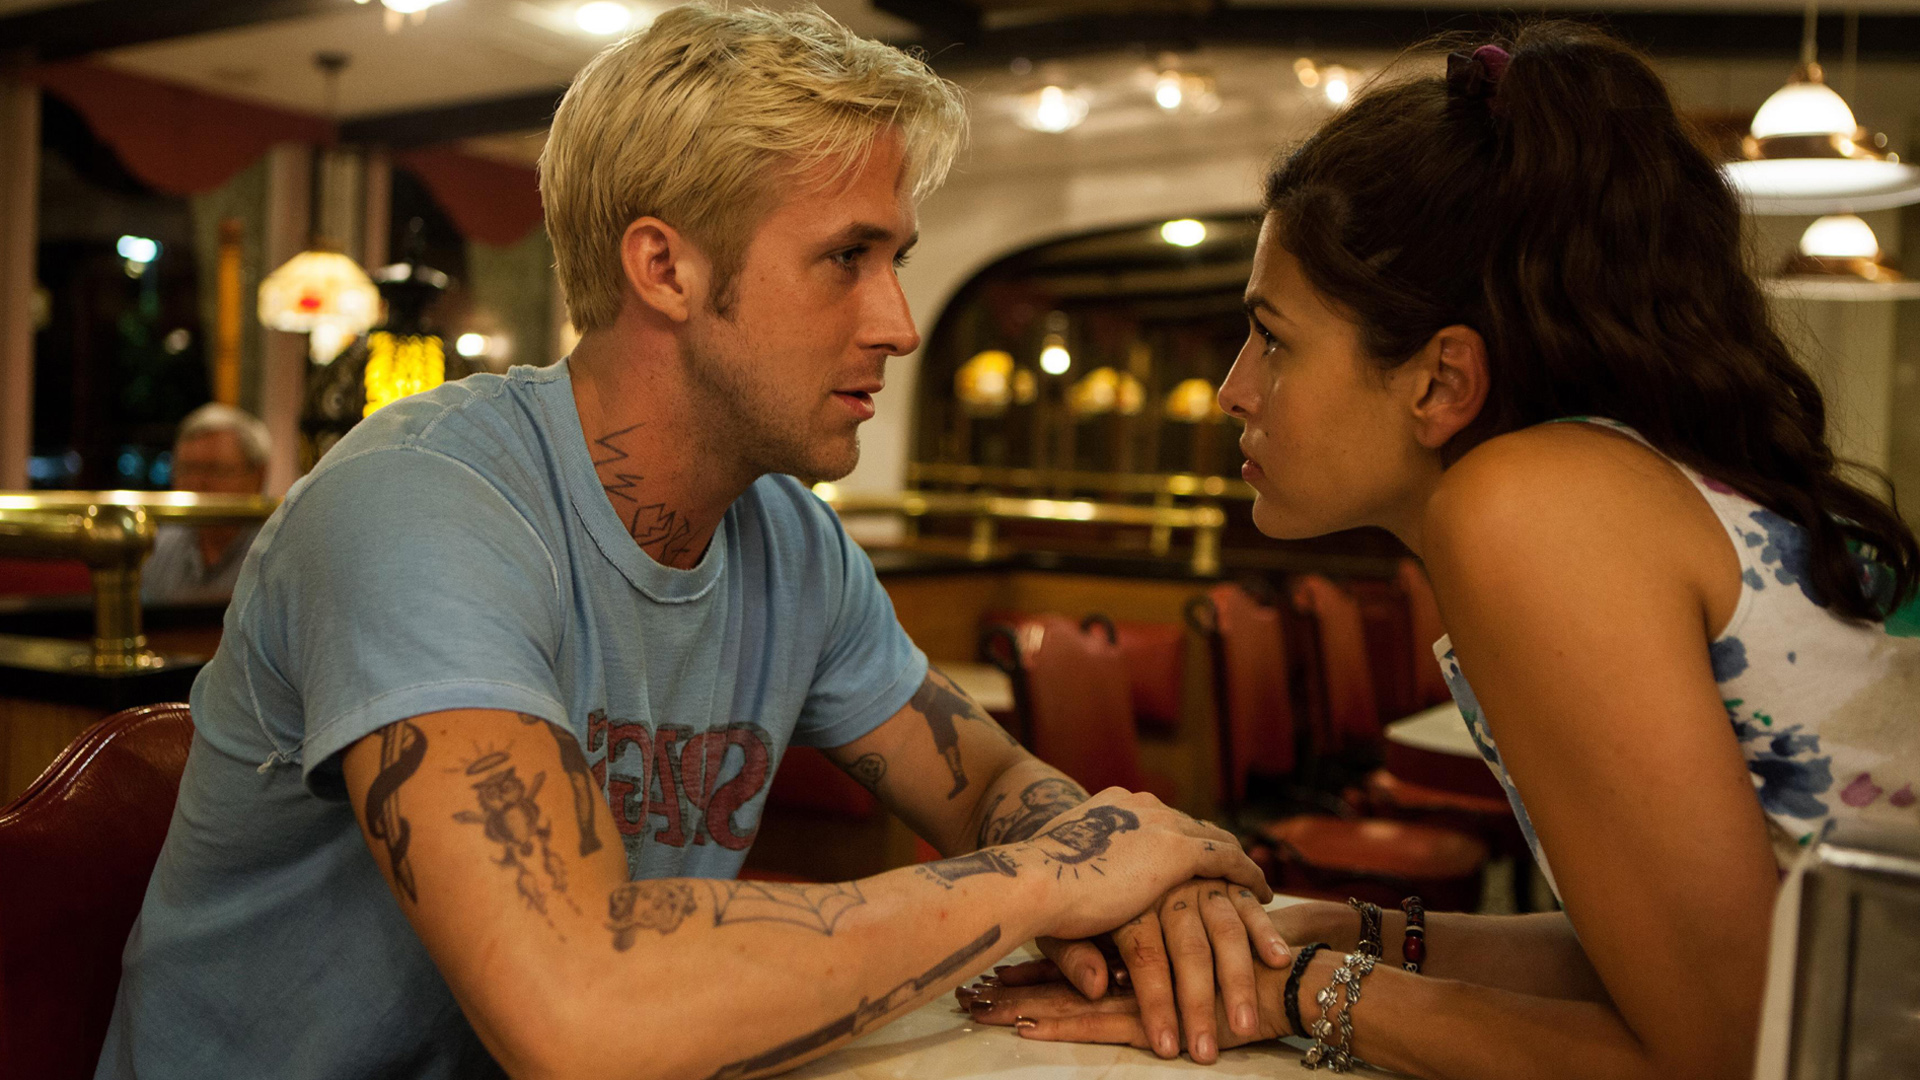 Where To Watch The Place Beyond The Pines - Watch The Place Beyond the Pines full HD - GoMovies